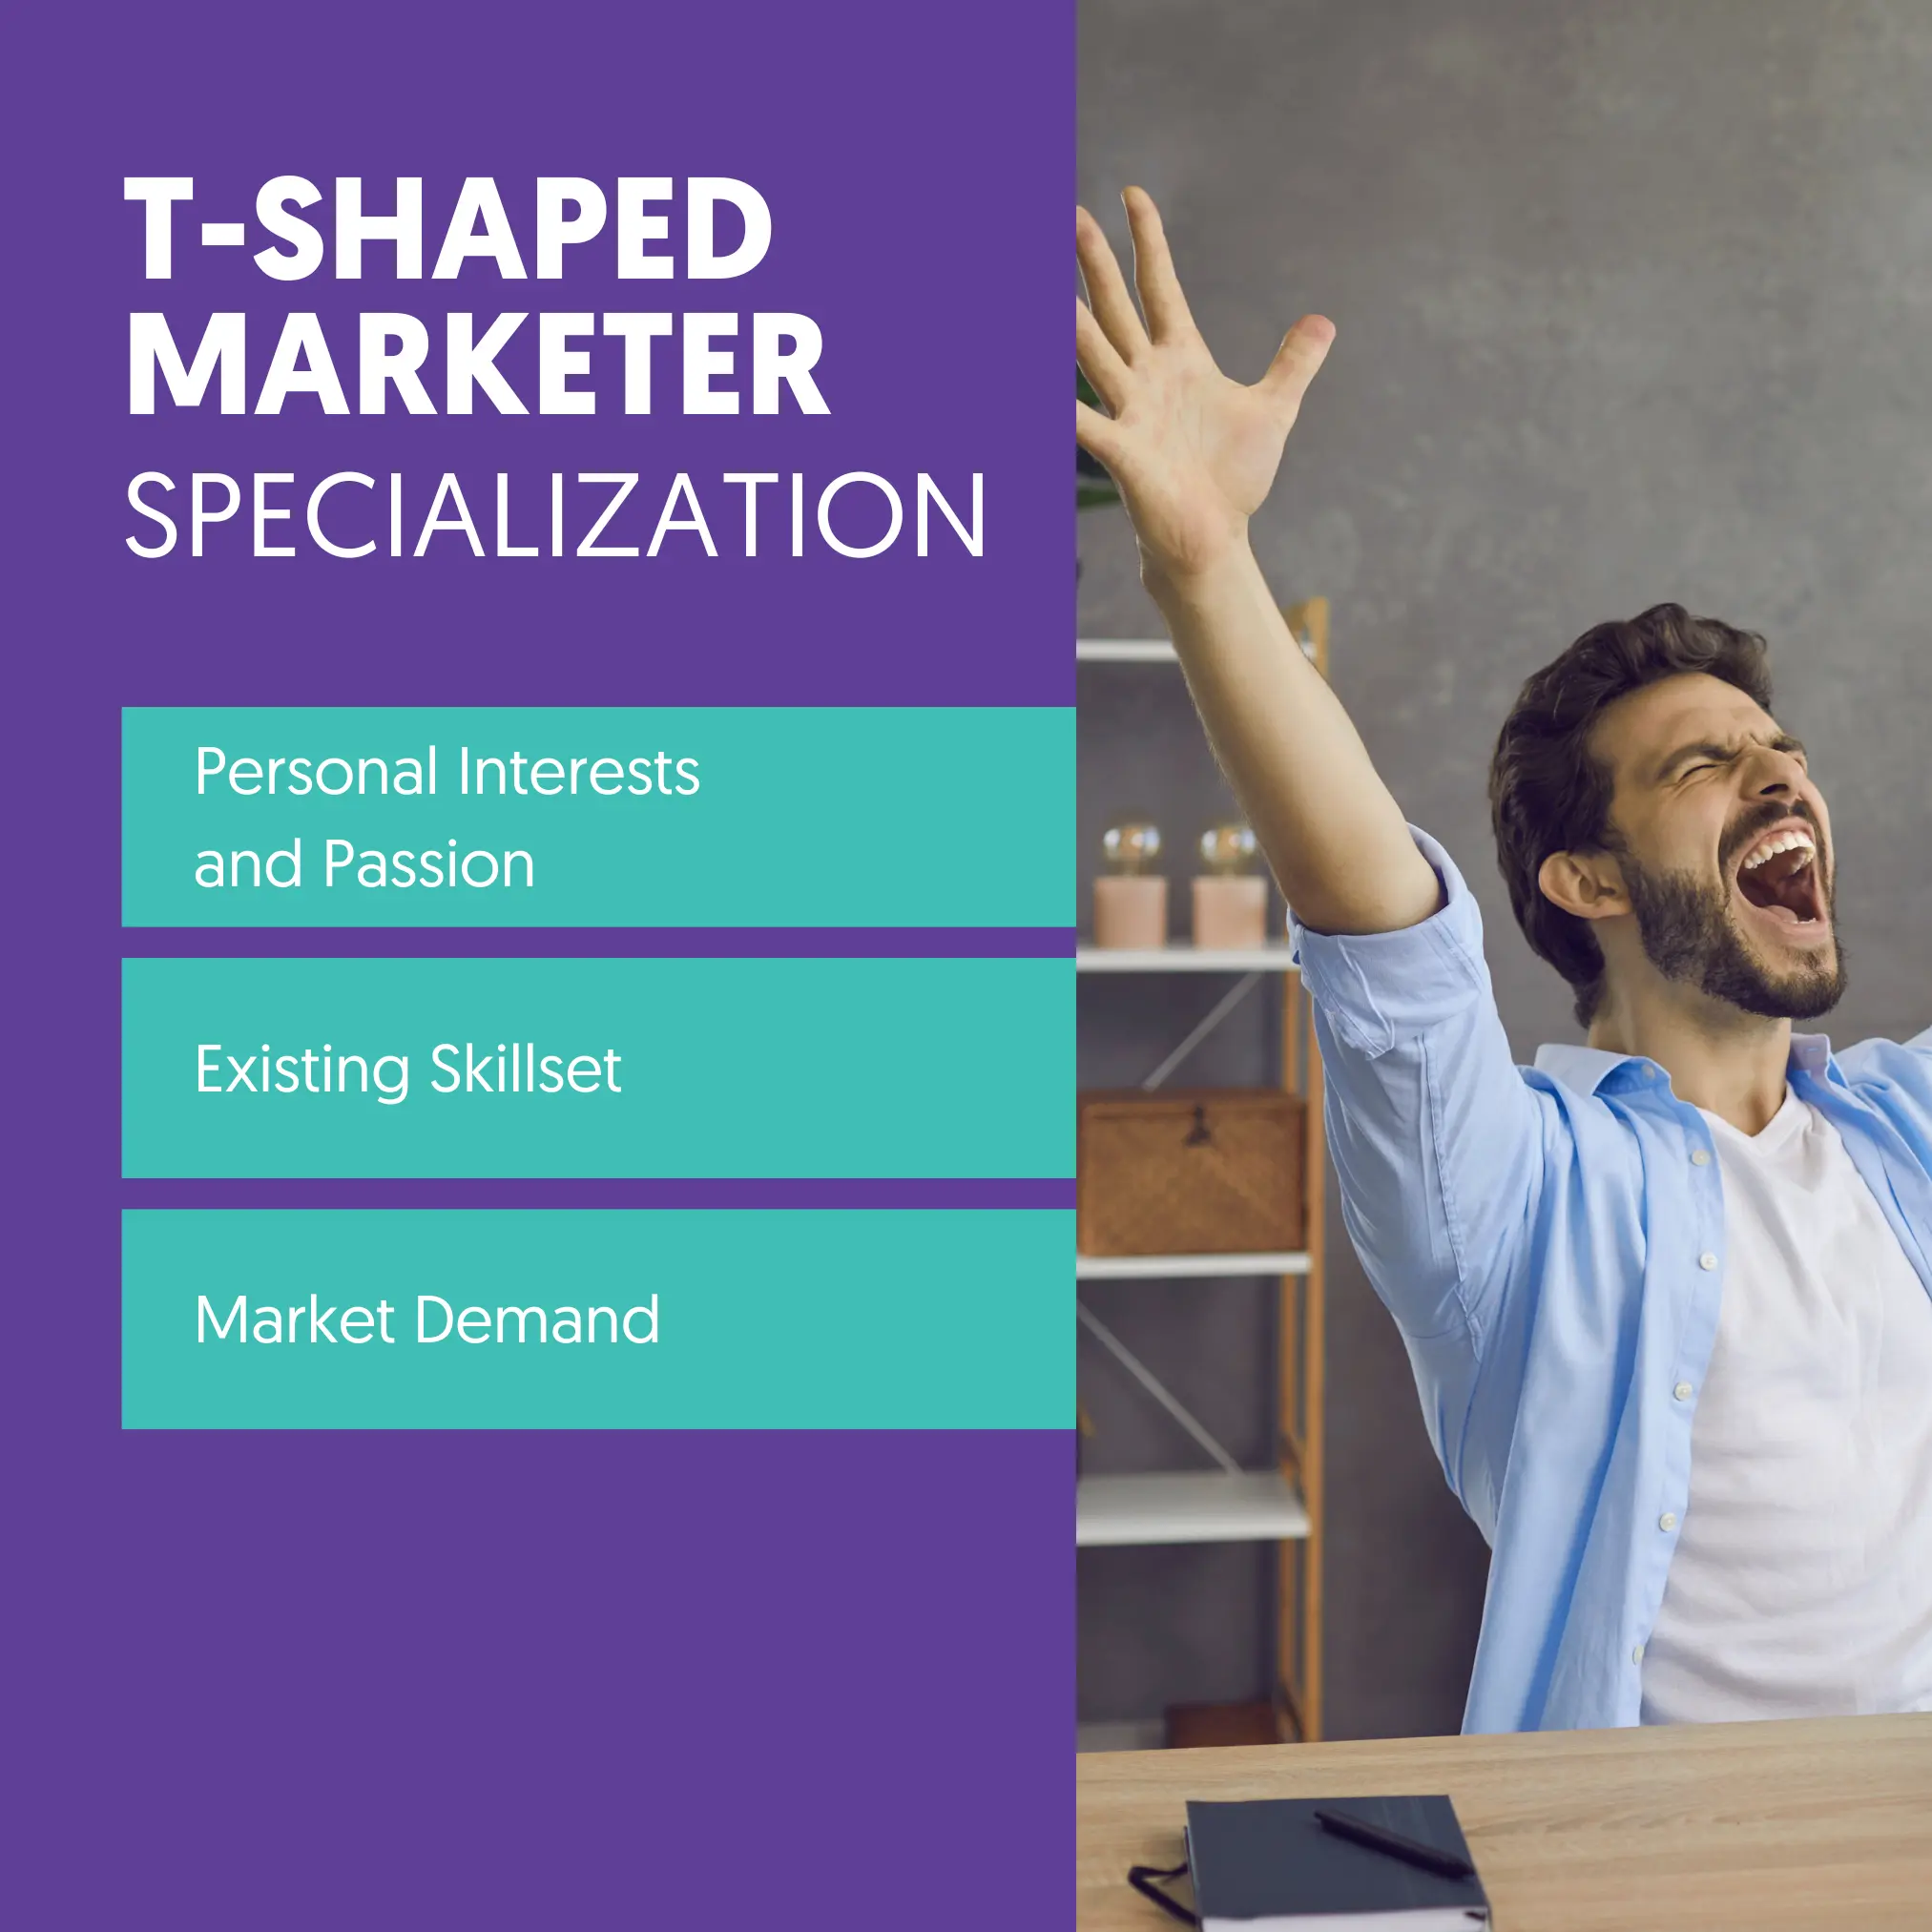 What Is a T-Shaped Marketer & How To Become One?